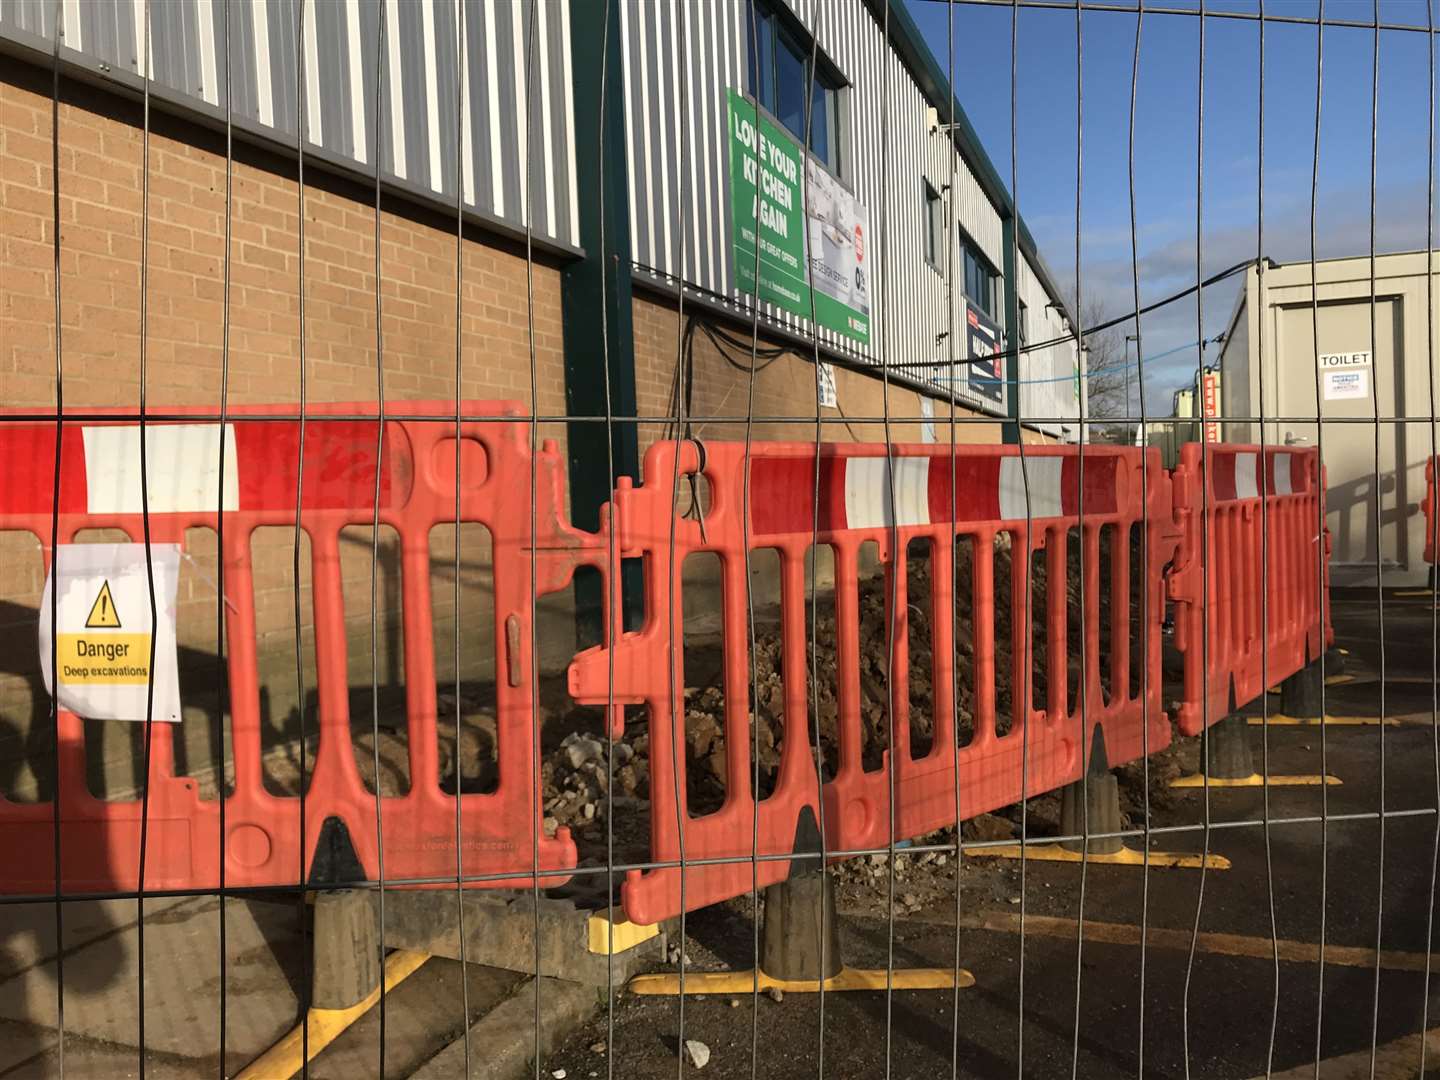 The pavement outside the empty store has been dug up as alterations are made to its shop front